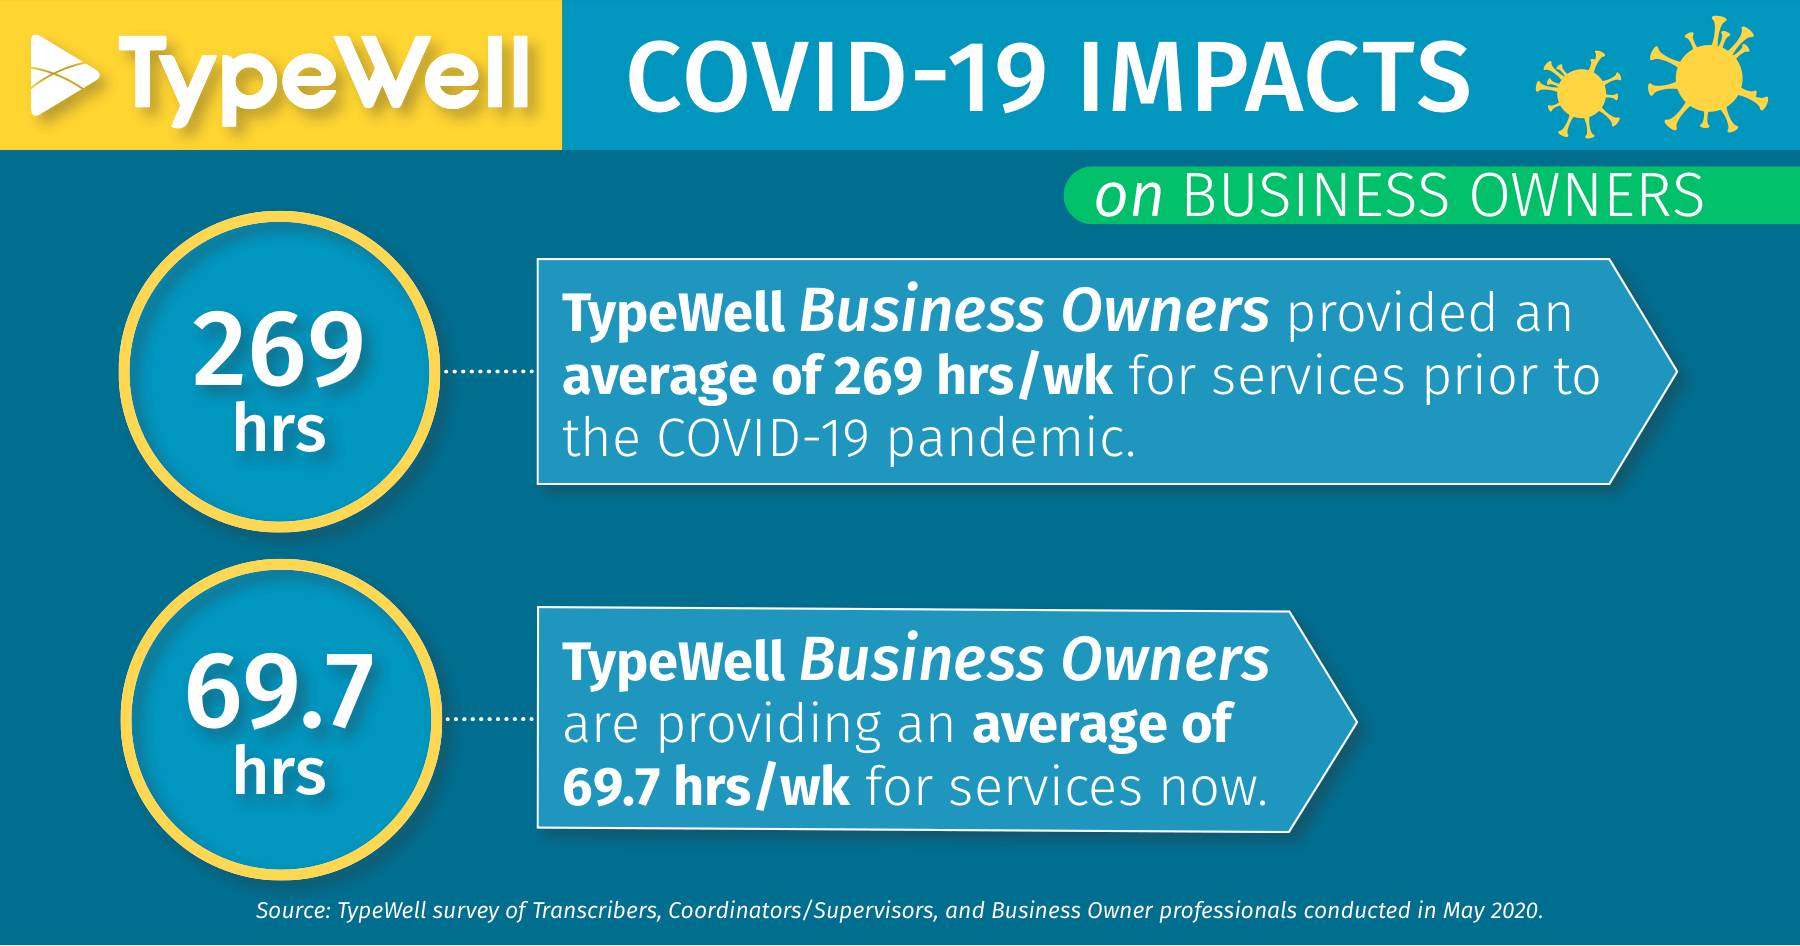 COVID-19 impacts on business owners: average 69.7 hours/week for TypeWell services, down from 269 hours/week before the pandemic.